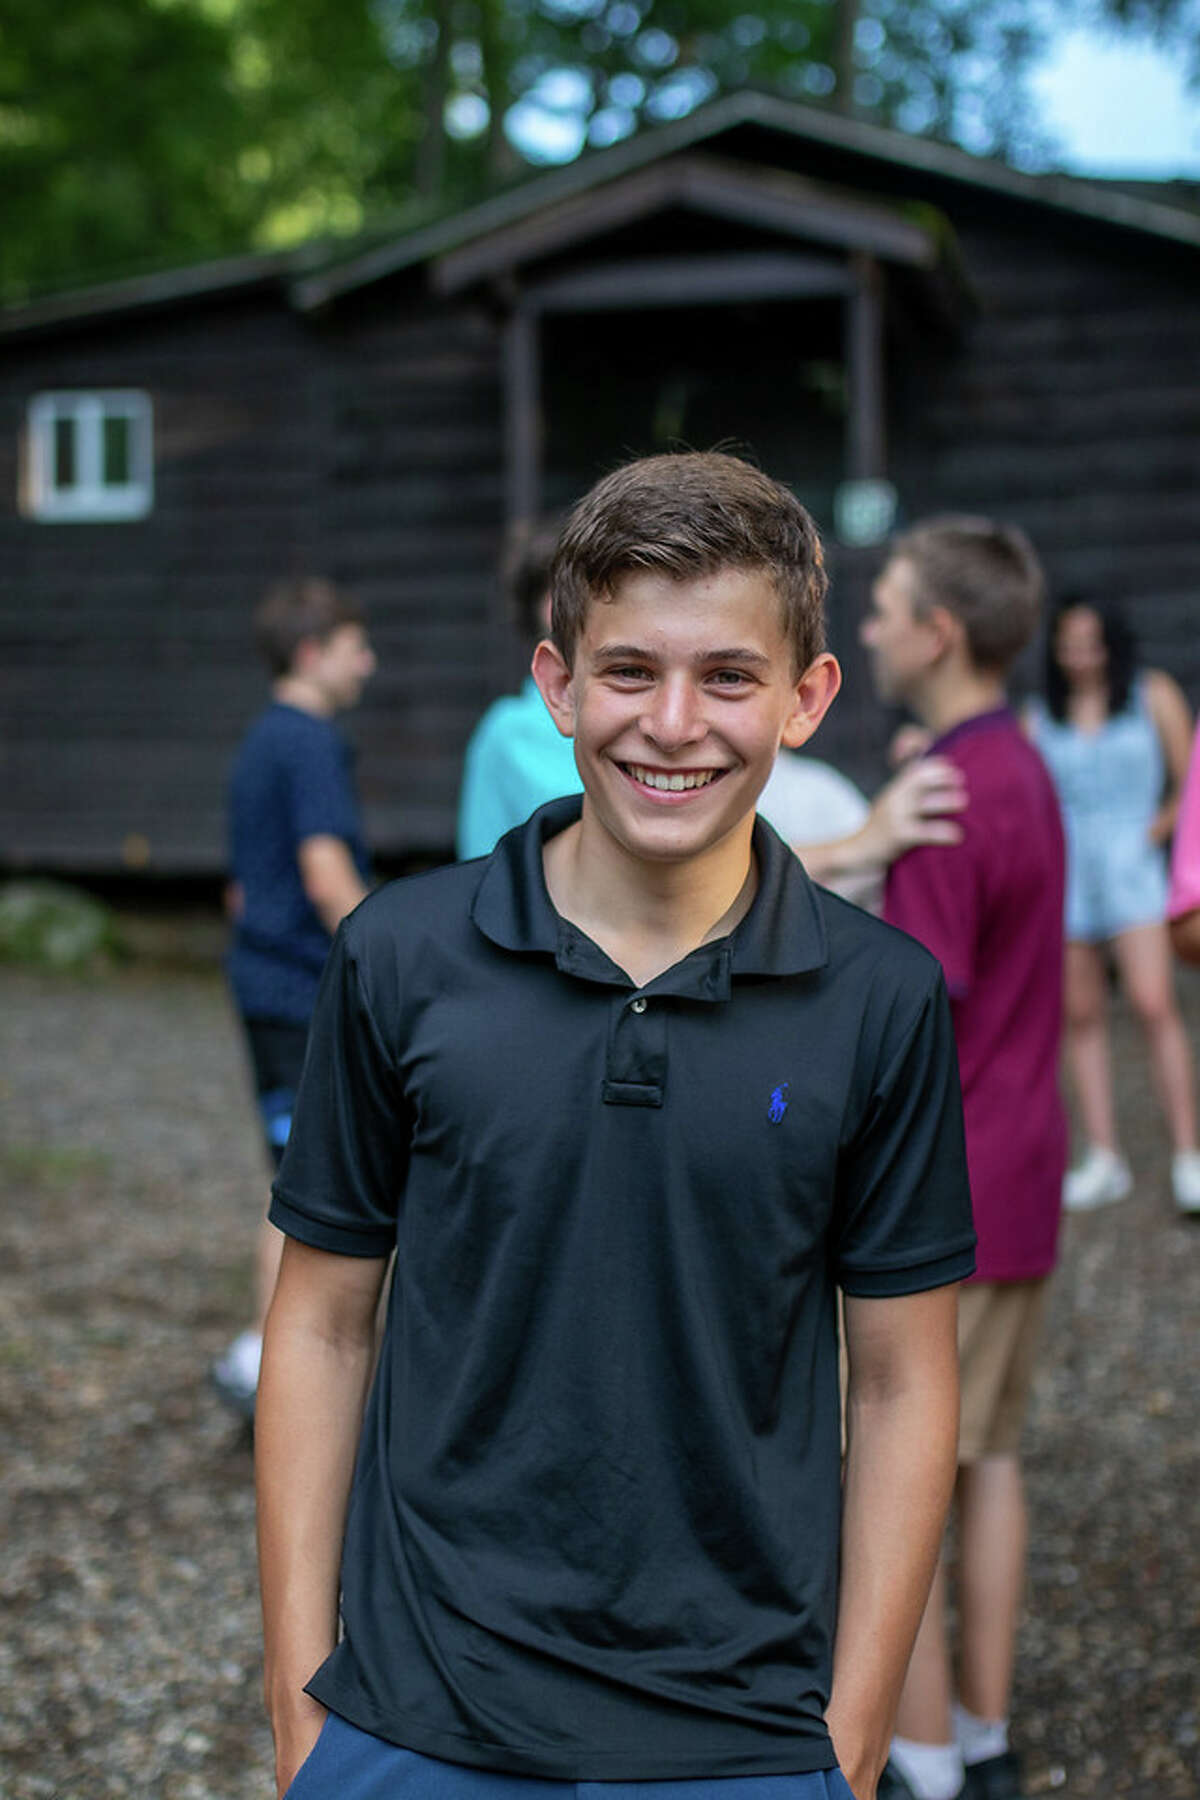 Teddy Balkind attends Camp Awosting in Litchfield County during the summer of 2021. Balkind, a member of the St. Luke's School hockey team, died Jan. 6, 2021, from a neck injury sustained in a game against Brunswick School in Greenwich.